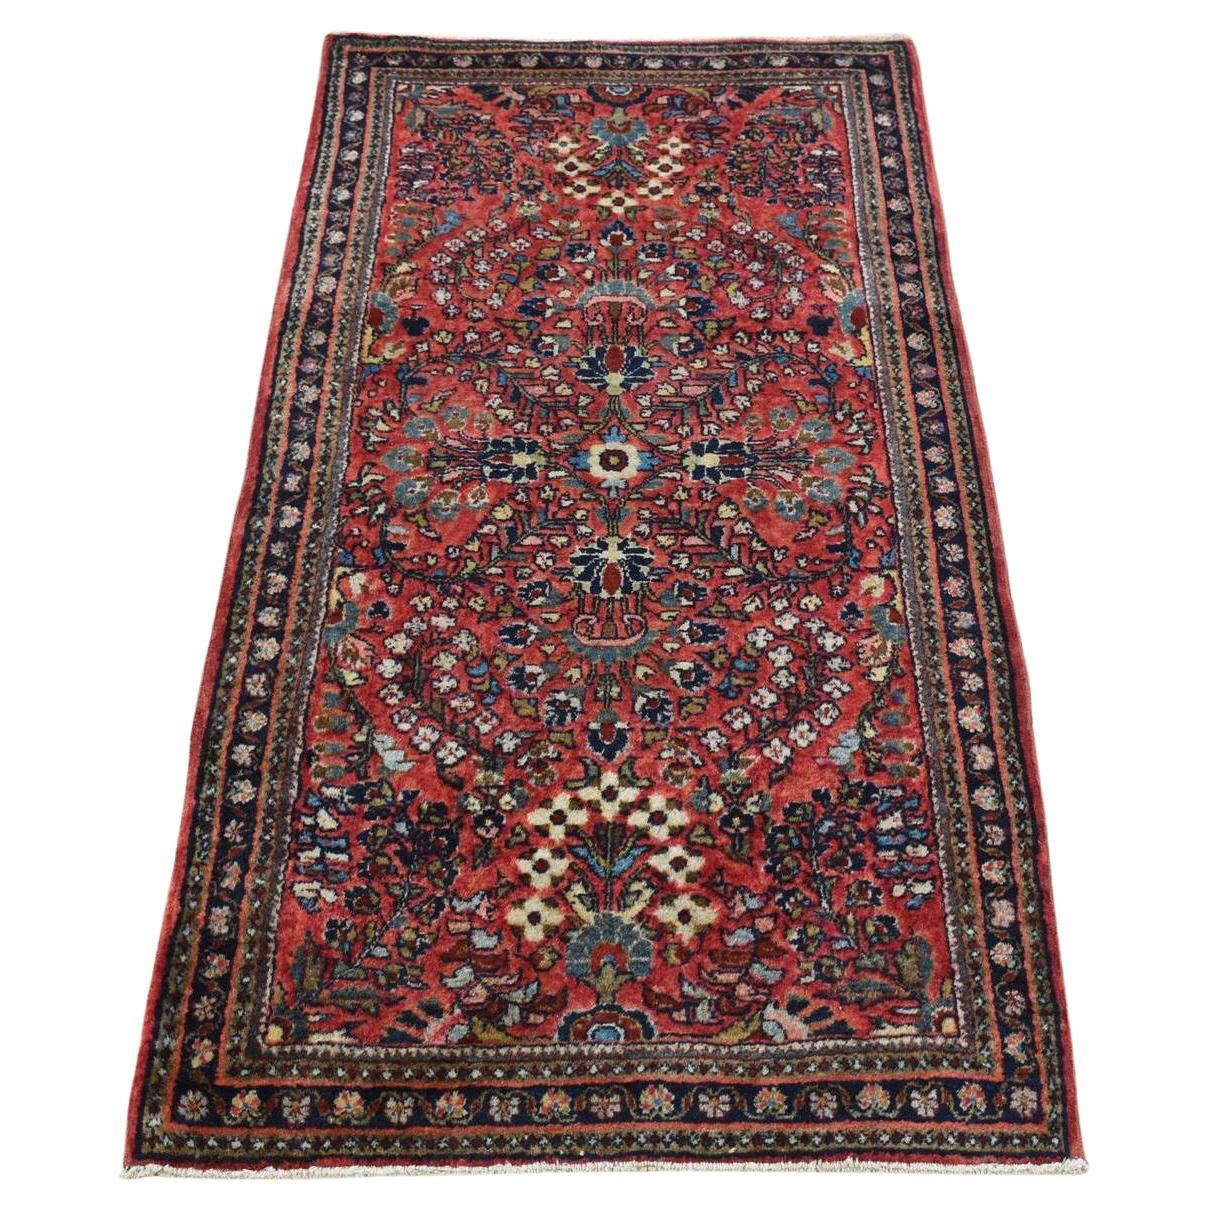 Ribbon Red Antique Persian Sarouk Clean and Soft Hand Knotsted Mat Rug 2'1 "x4'1"